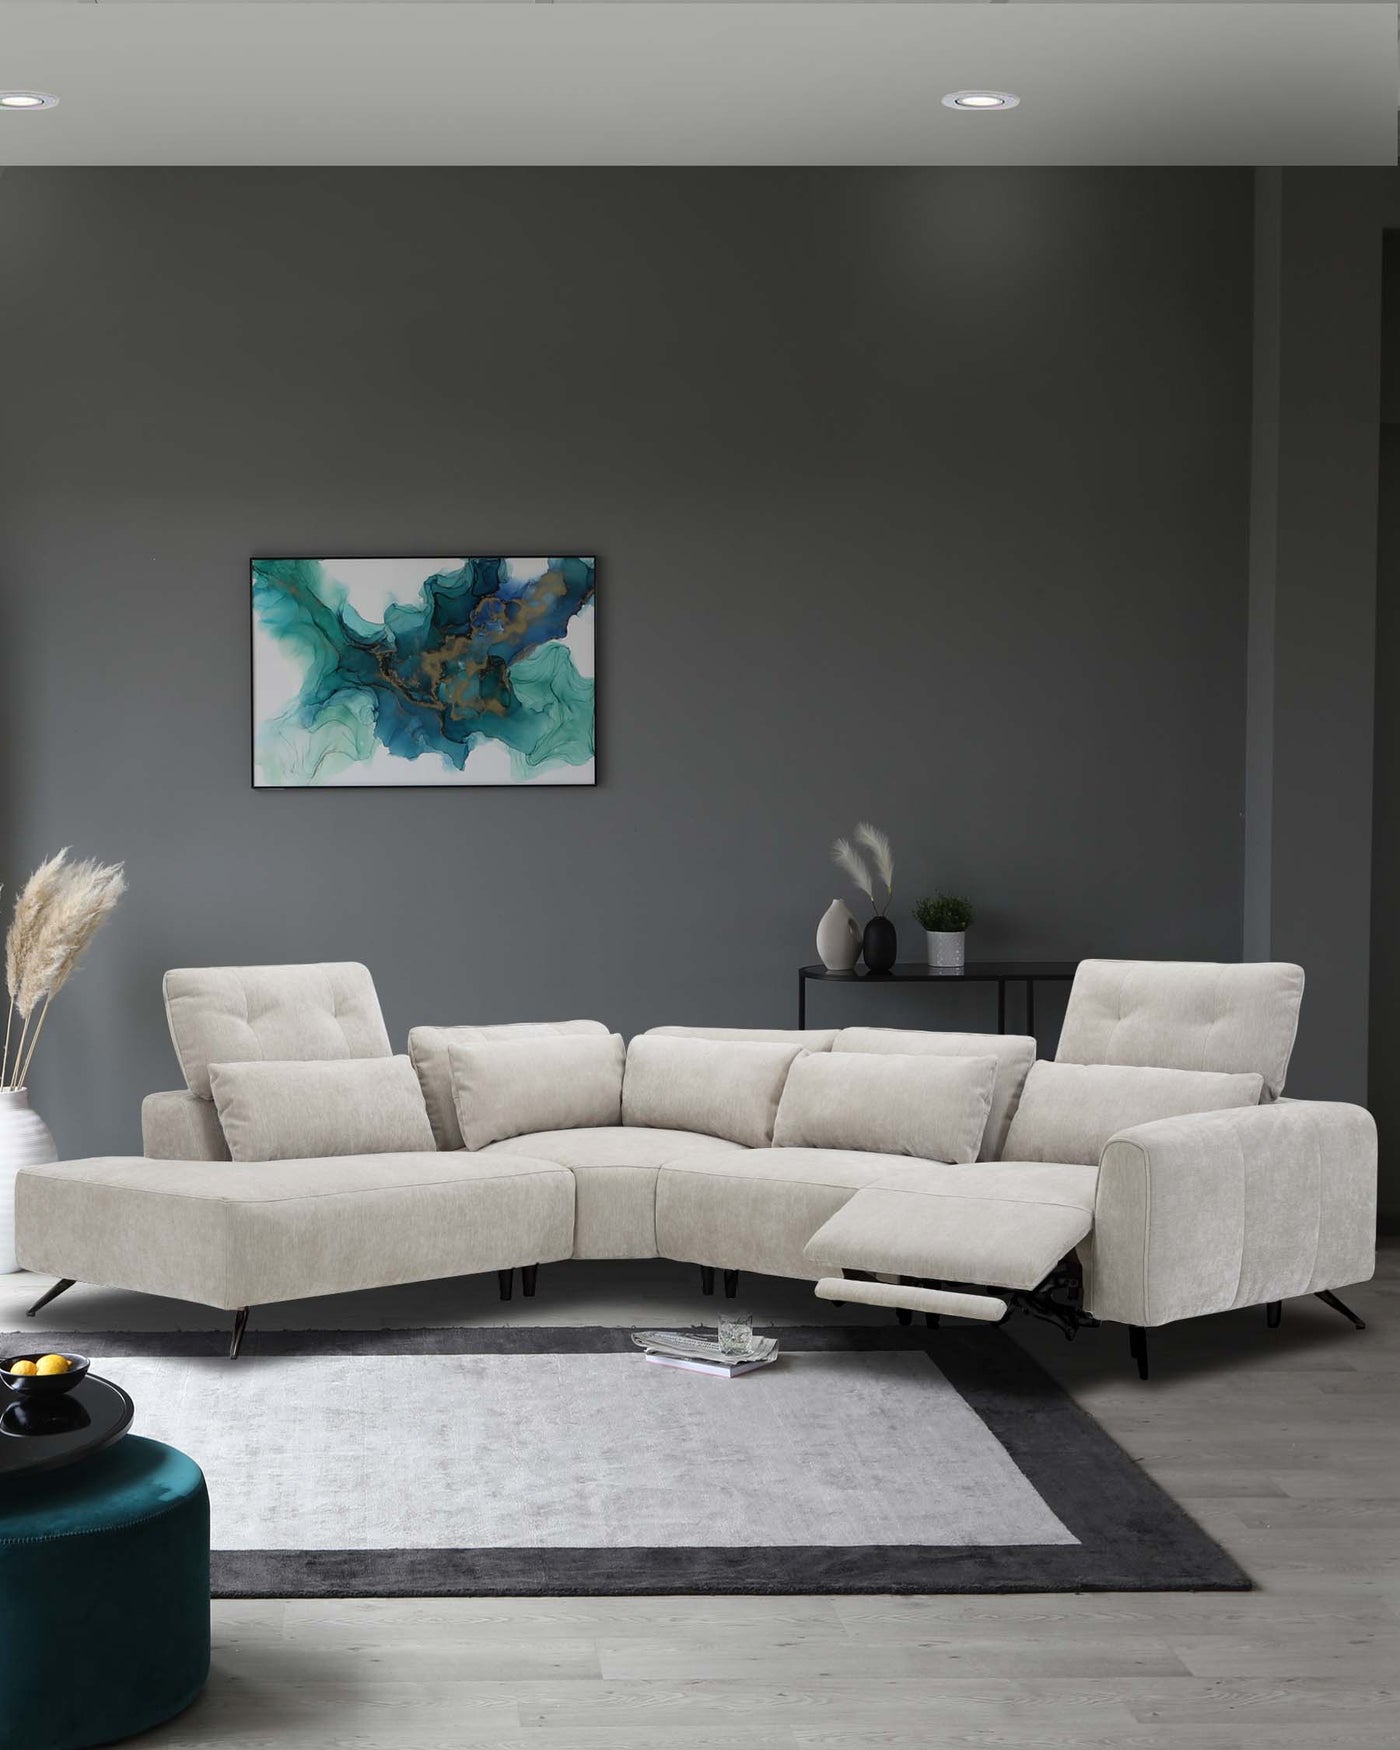 Modern L-shaped sectional sofa in light beige fabric with adjustable backrests and metal legs, positioned on a two-tone grey area rug. A round teal ottoman sits off to the side, with a sleek dark shelf unit in the background holding minimalistic decor.